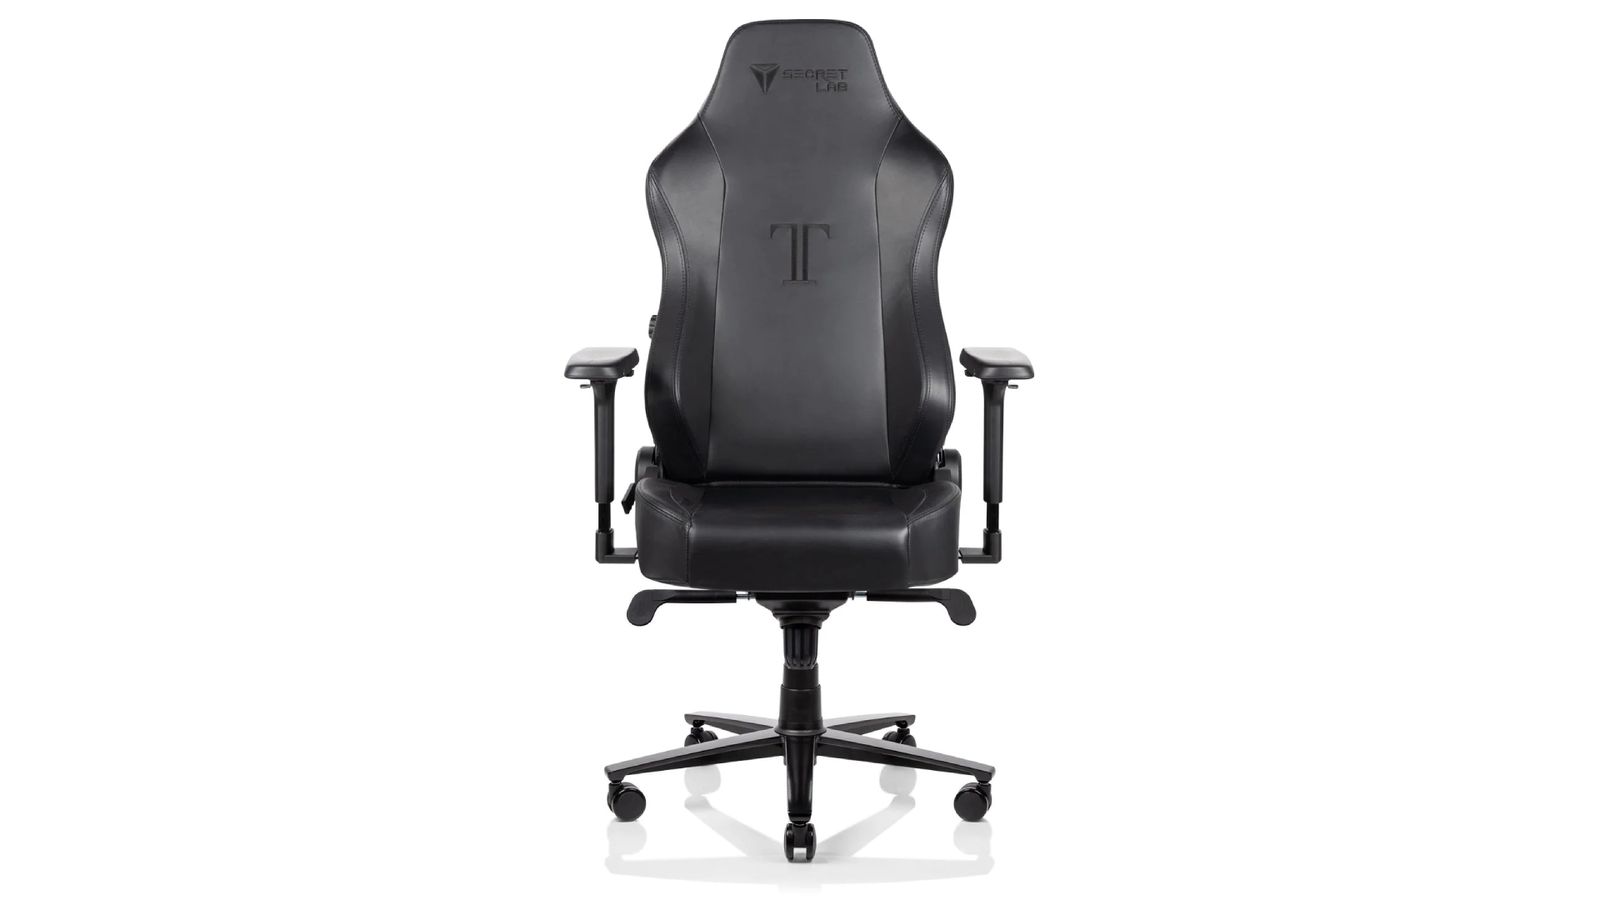 Secretlab TITAN 2020 product image front-on of an all-black gaming chair featuring a T logo in the centre.